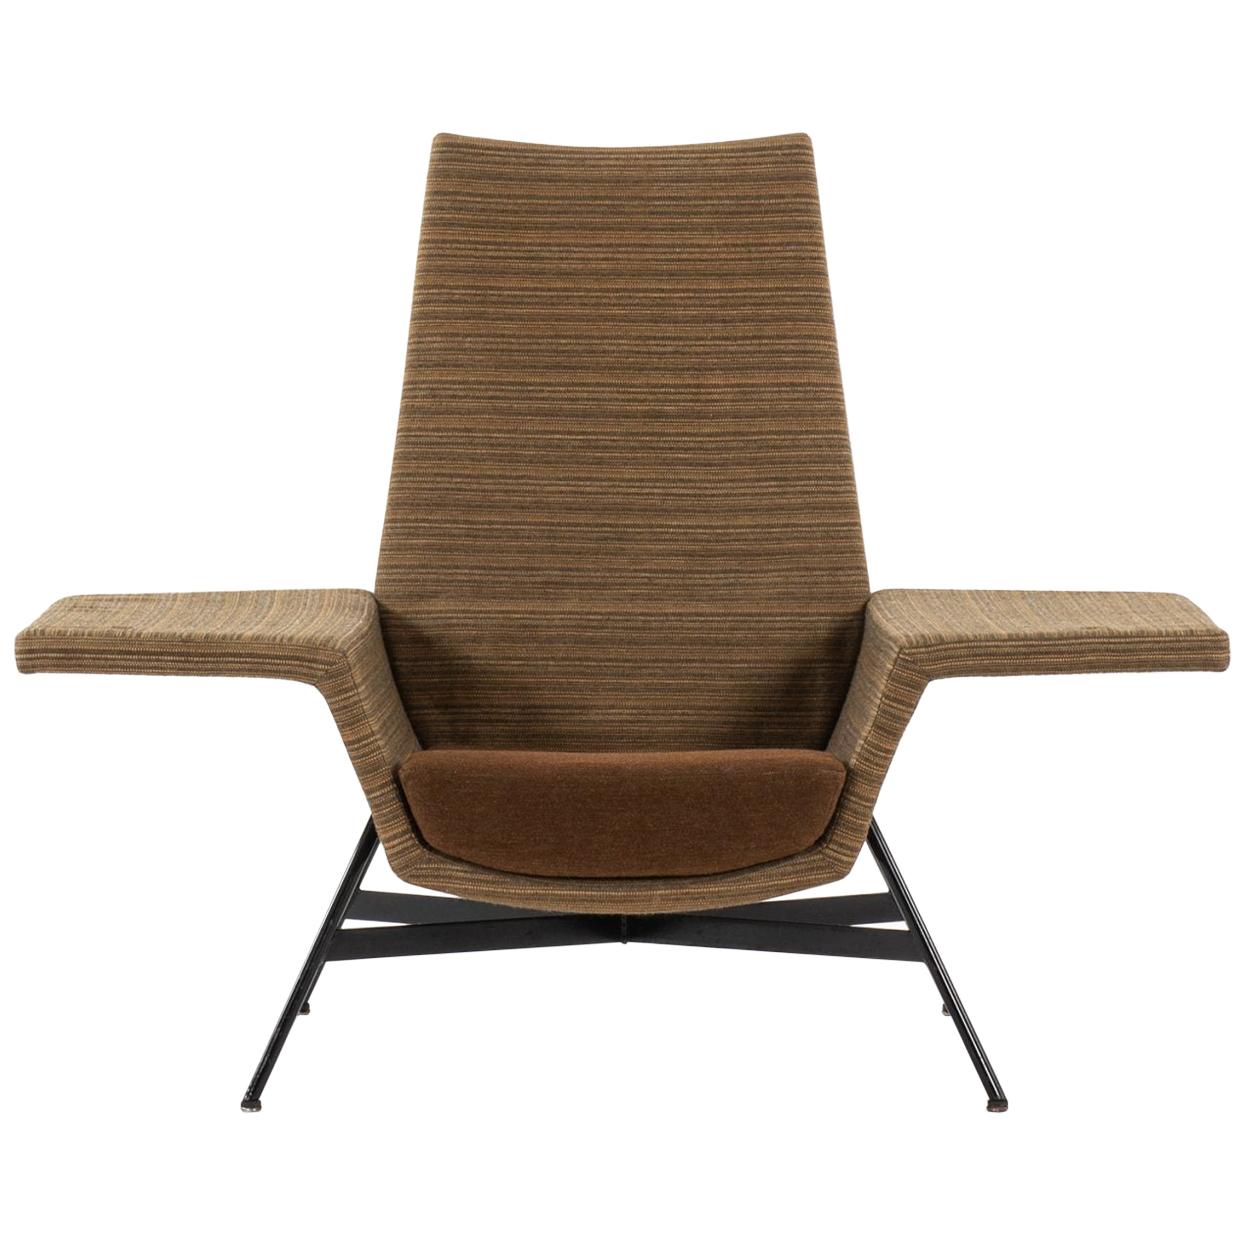 Otto Kolbe Easy Chair Produced by Walter Knoll in America